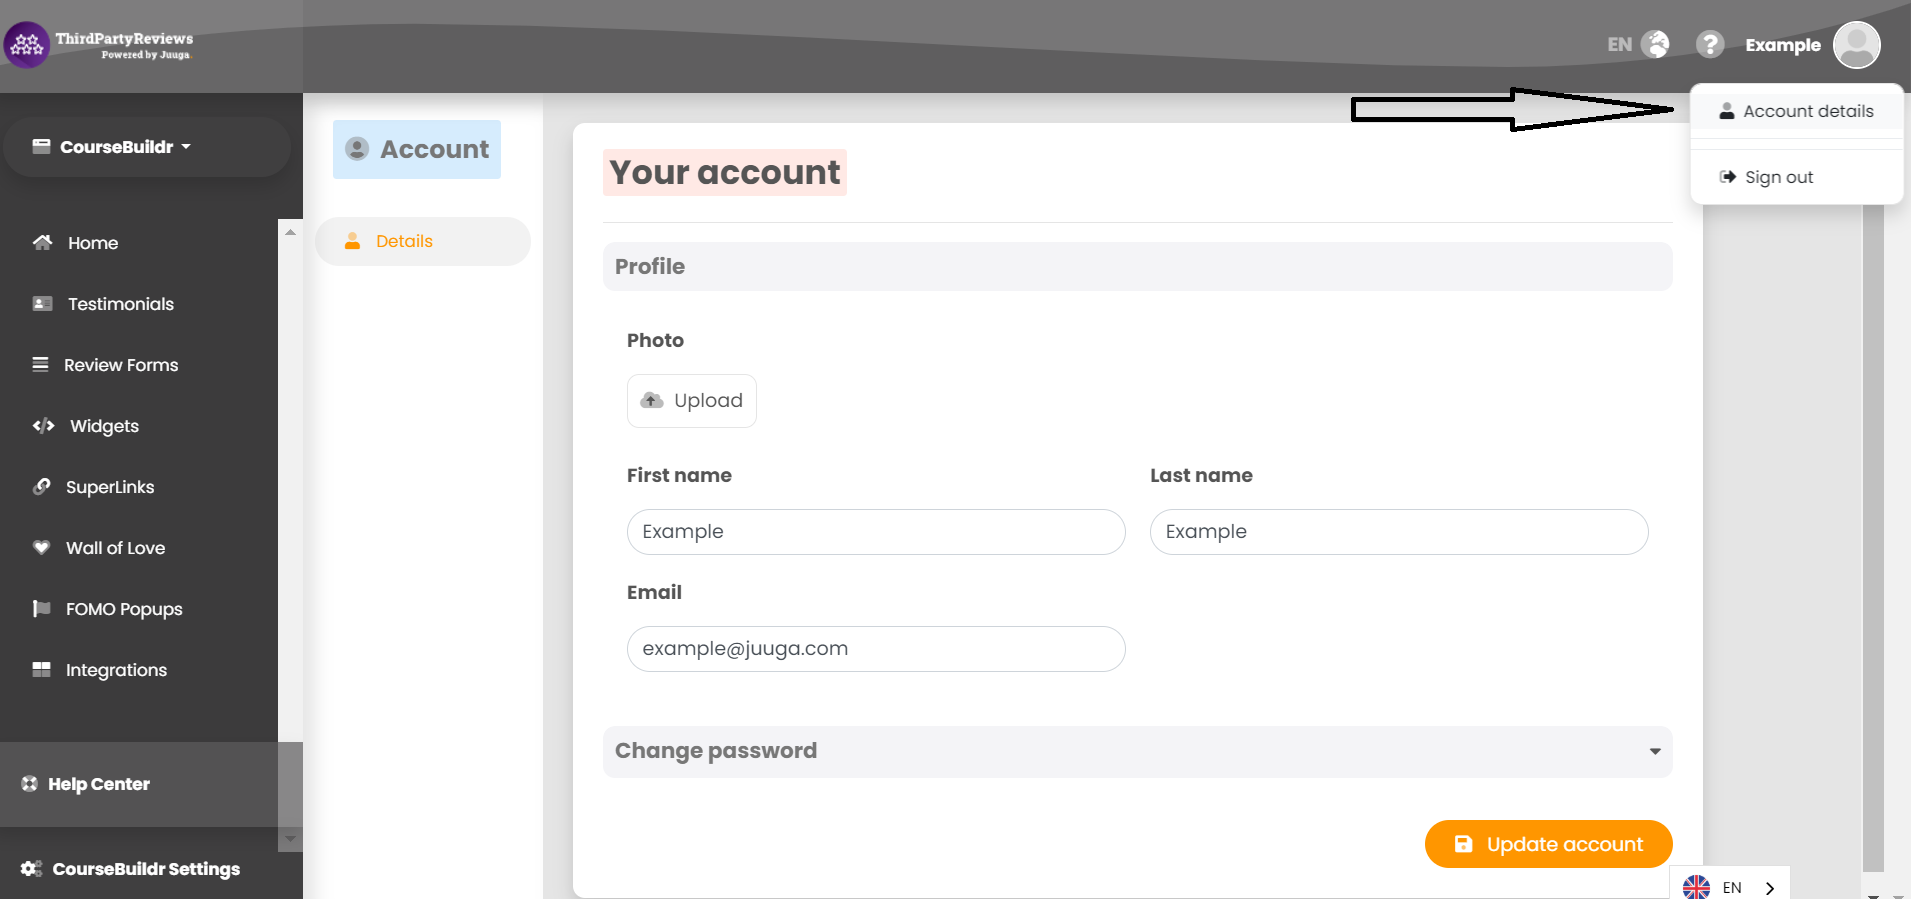 Select Account details from the dropdown menu.